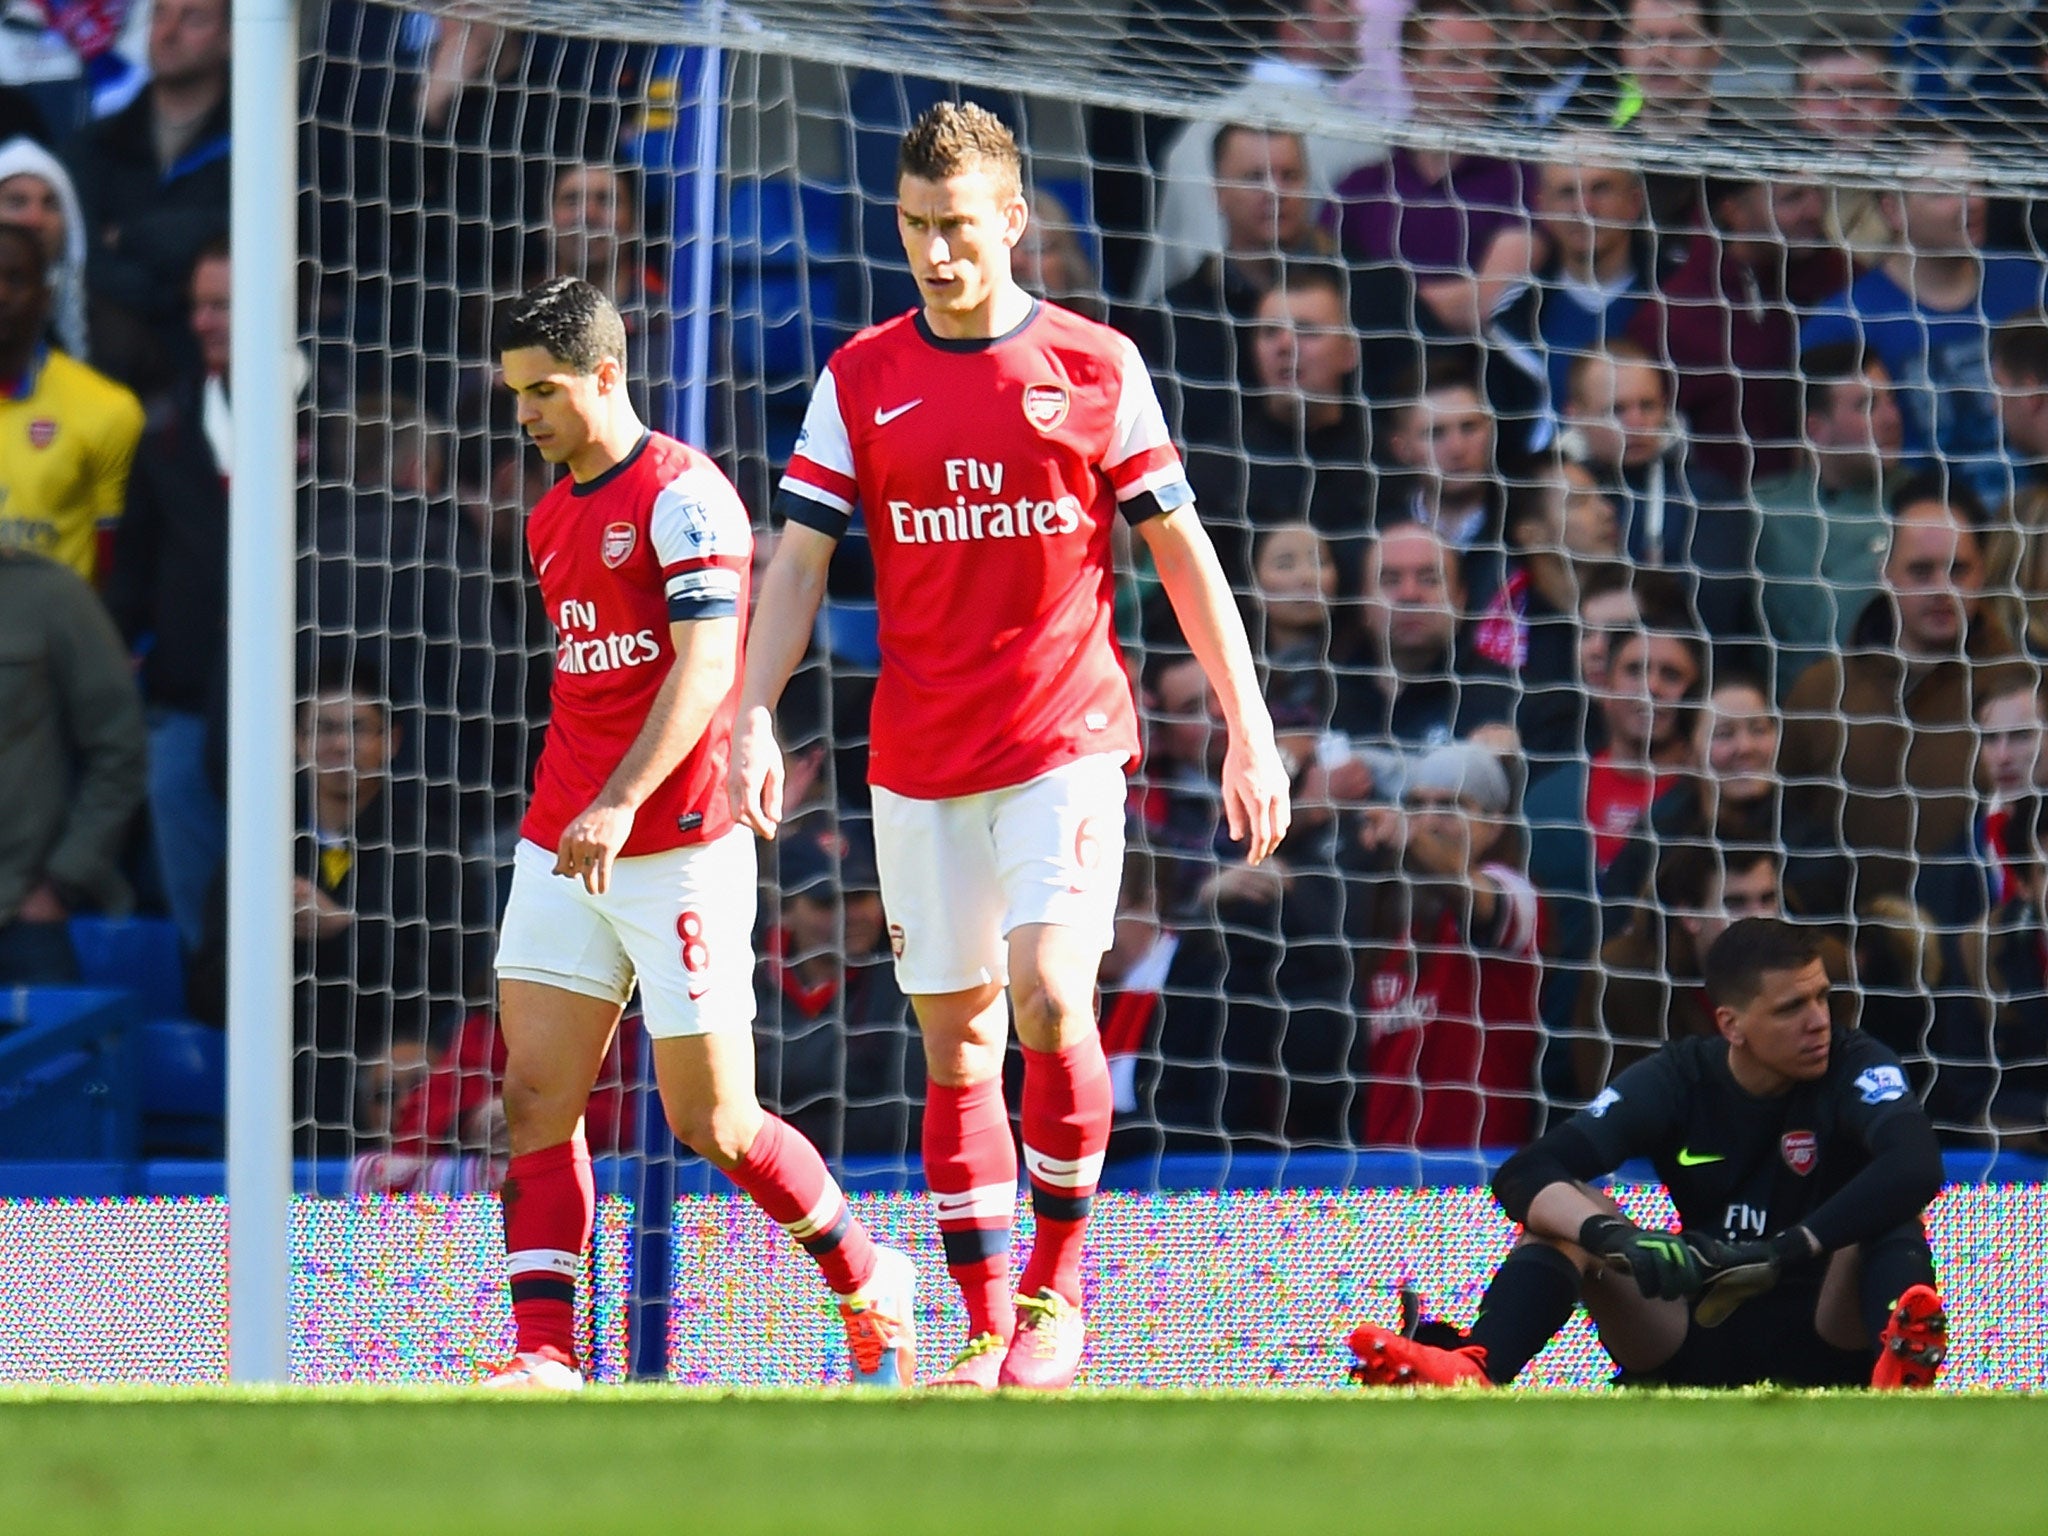 A dejected Mikel Arteta and Laurent Koscielny of Arsenal after conceding a fourth goal during the Premier League match against Chelsea